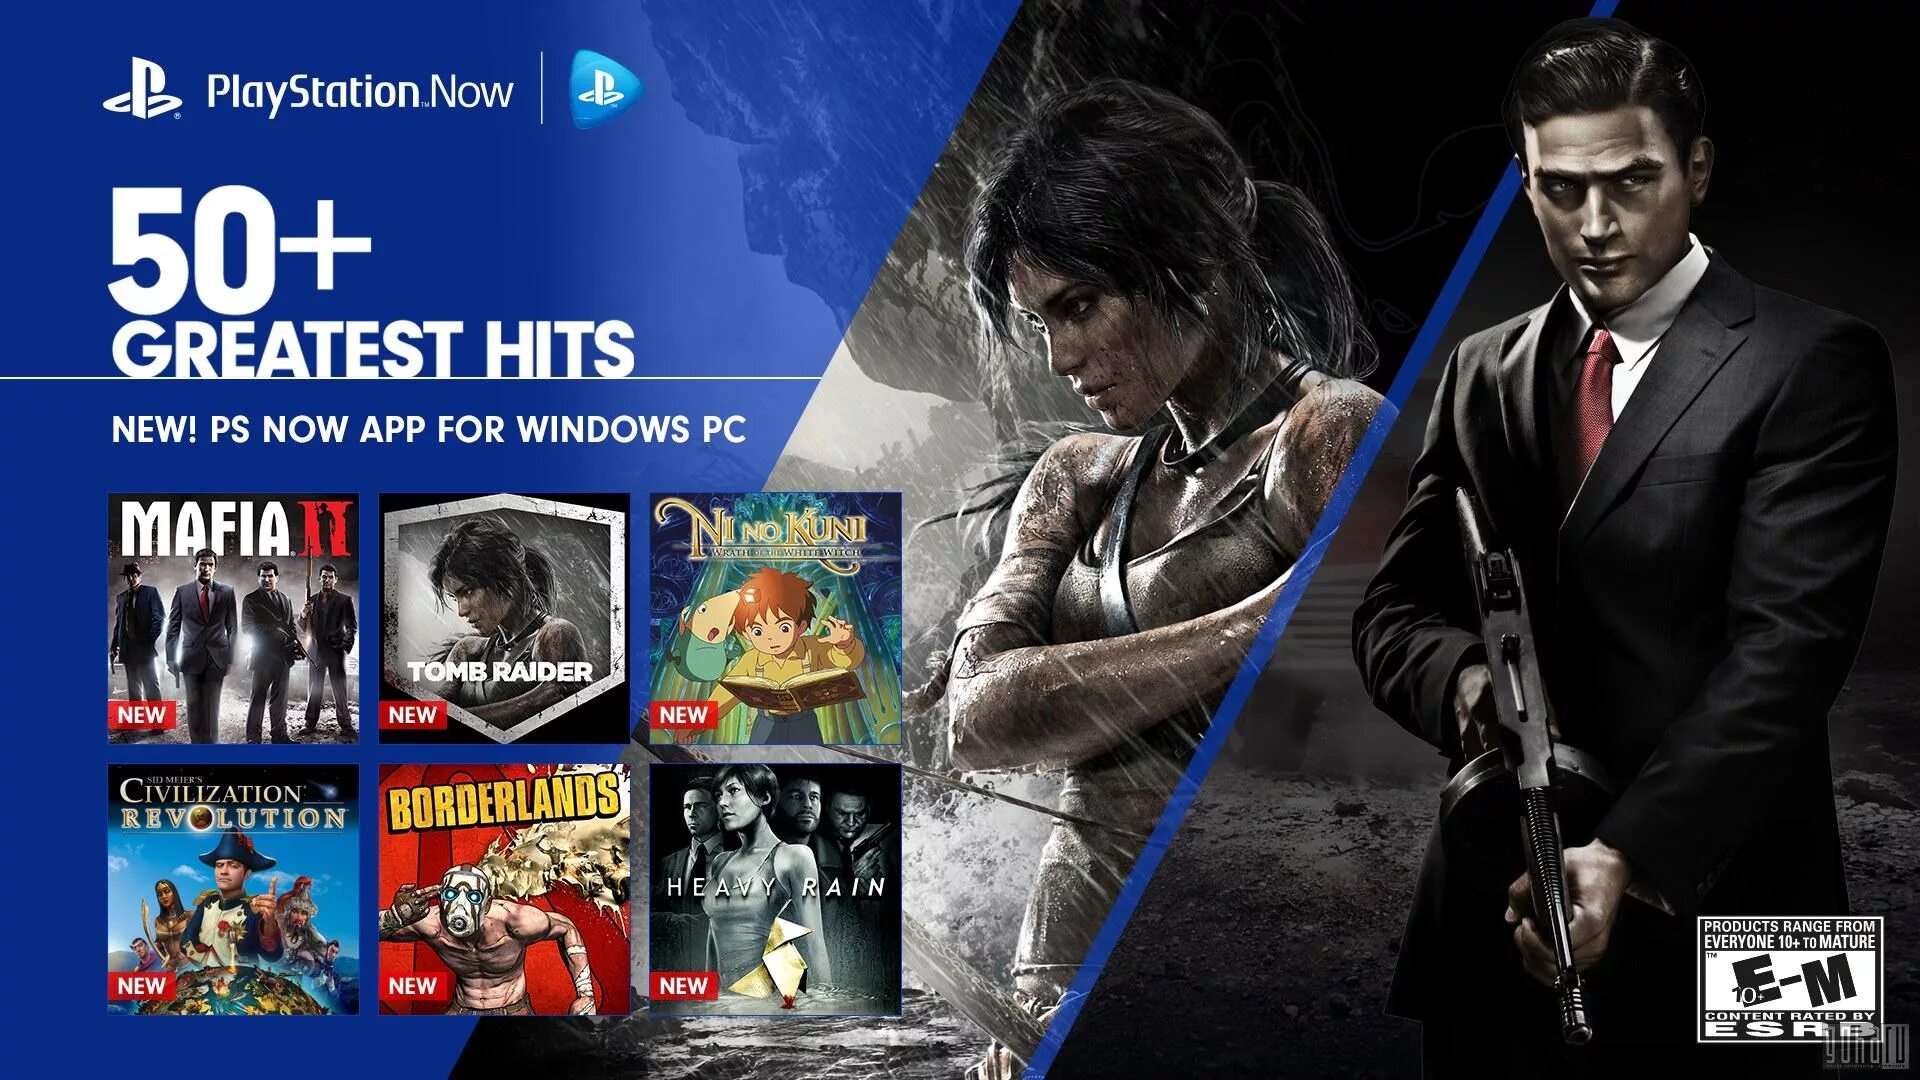 Стань playstation. PS Now. PLAYSTATION игры. PS Now игры. Постер PLAYSTATION.